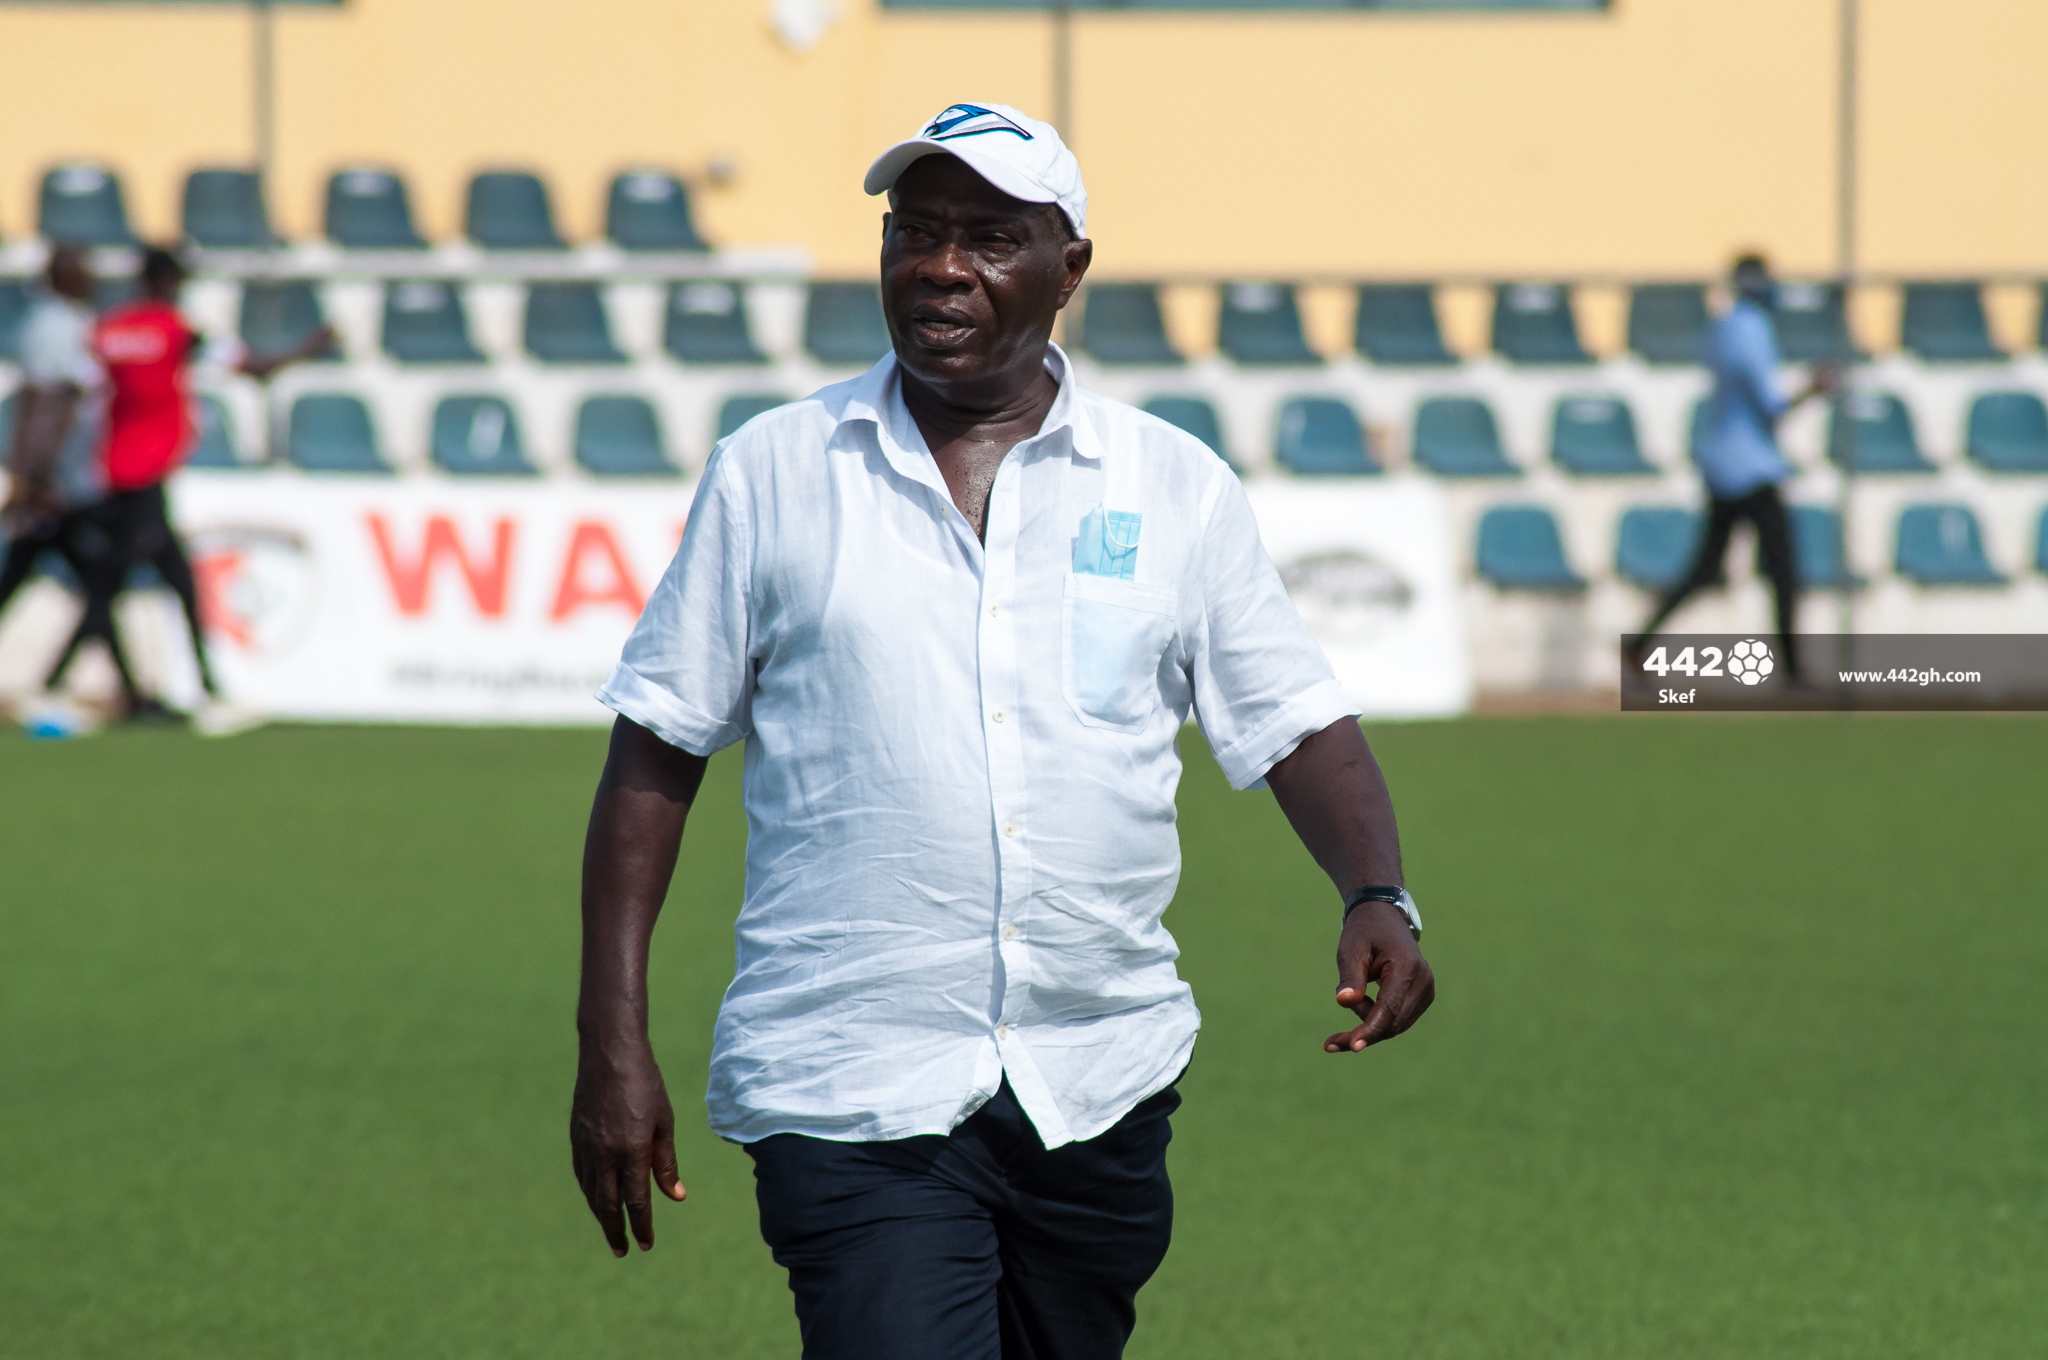 Annor Walker's exit part of our plans - FC Samartex chief Paul Anyaba